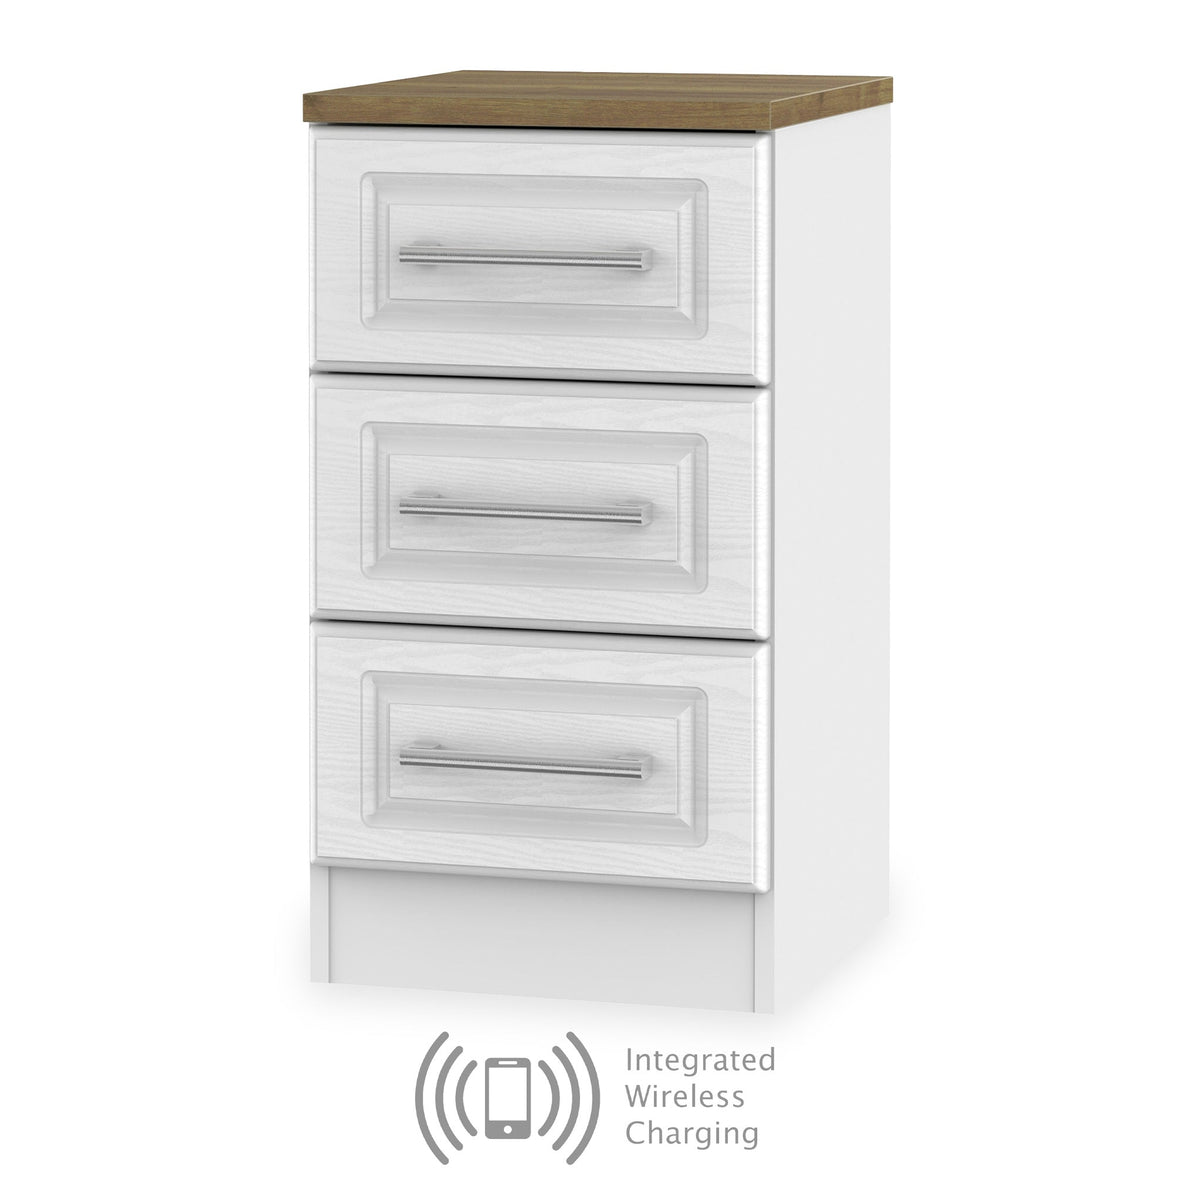 Talland White Wireless Charging 3 Drawer Bedside from Roseland